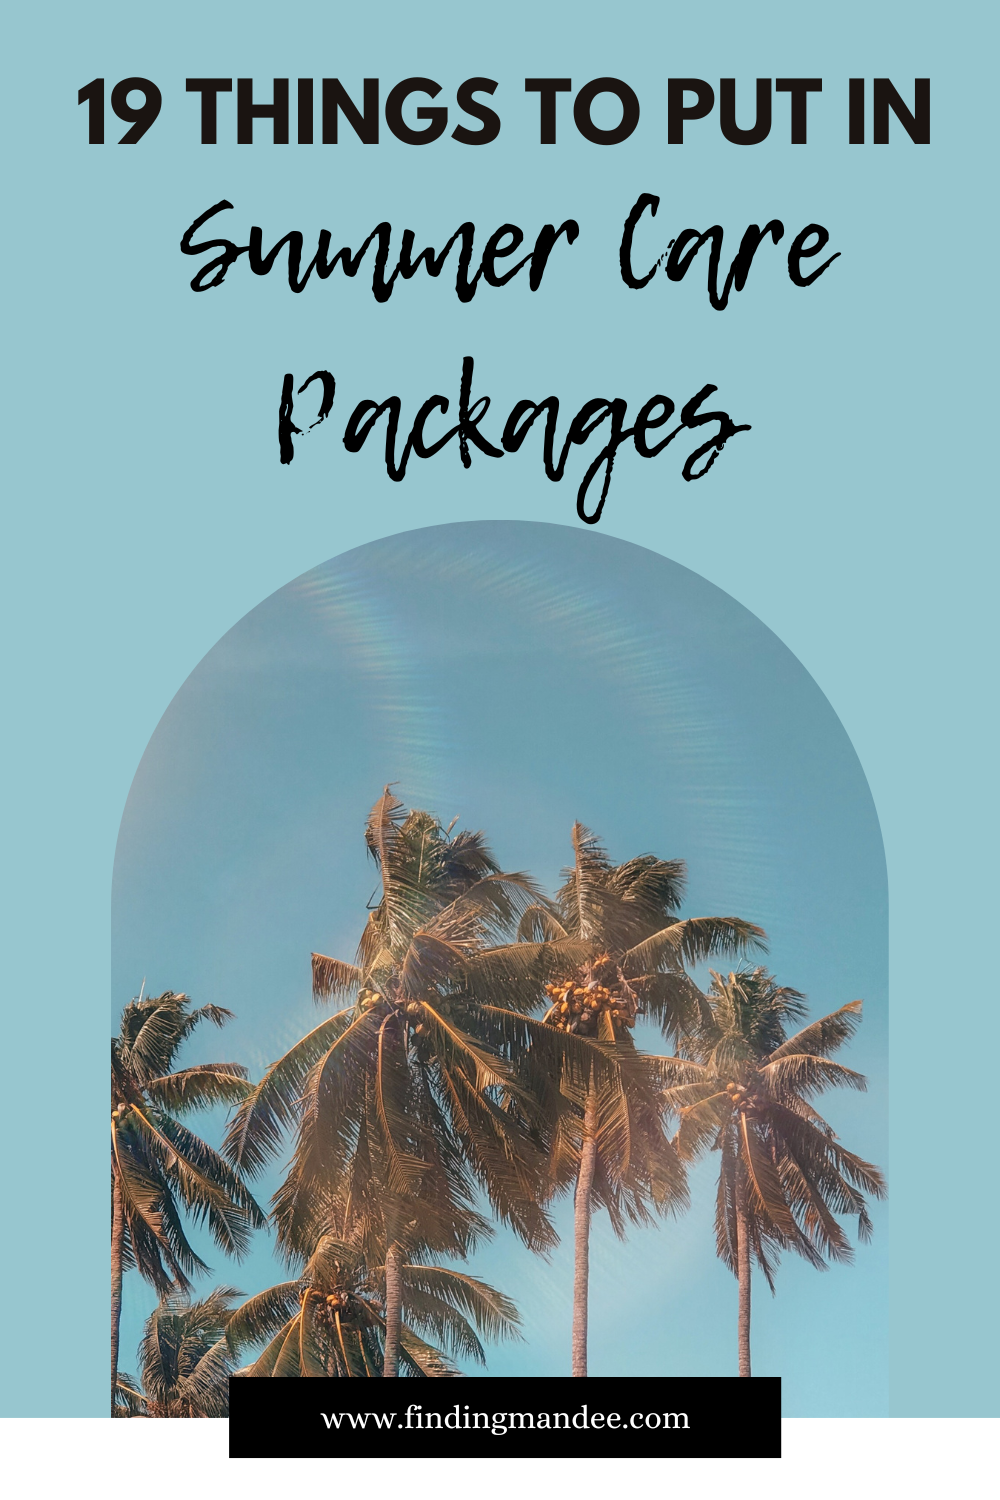 19 Things to Put in Summer Care Packages | Finding Mandee